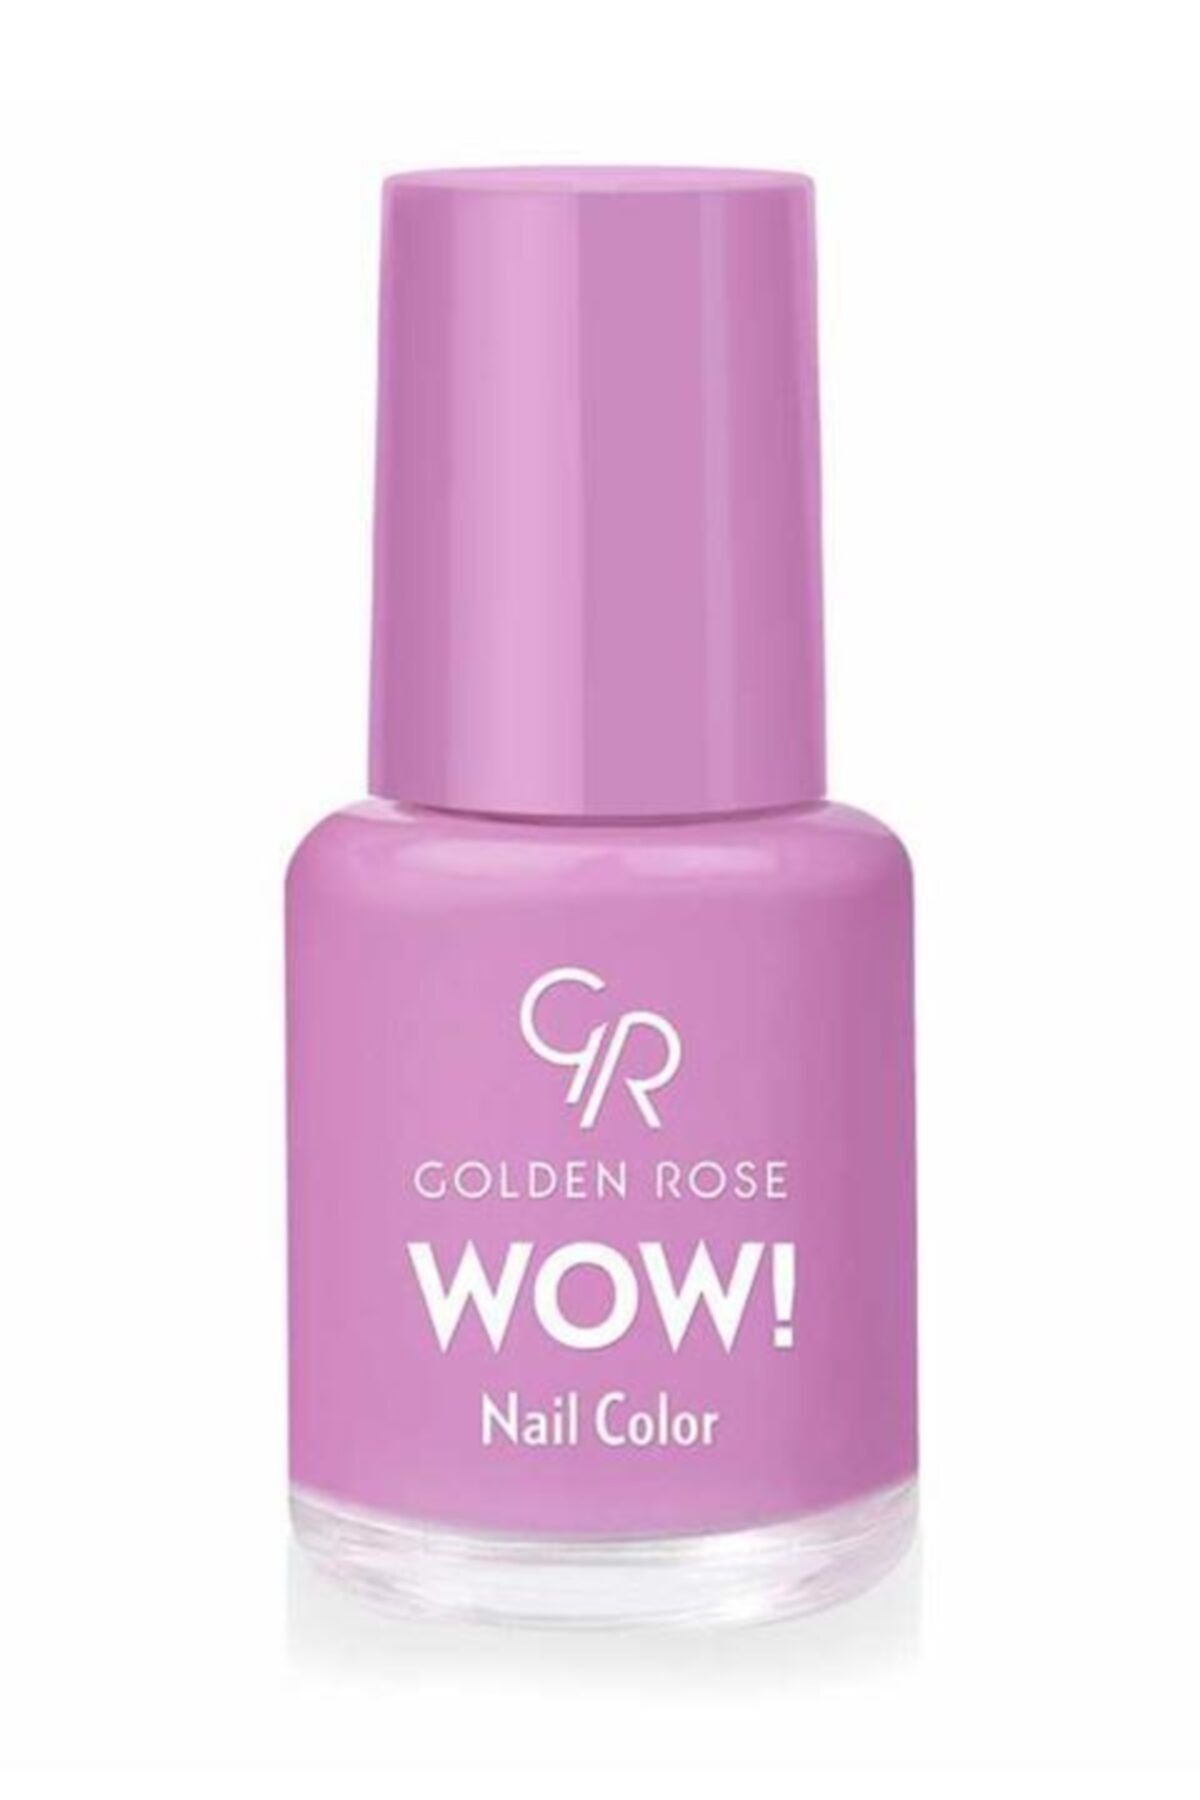 Golden Rose Wow Nail Color - No 29